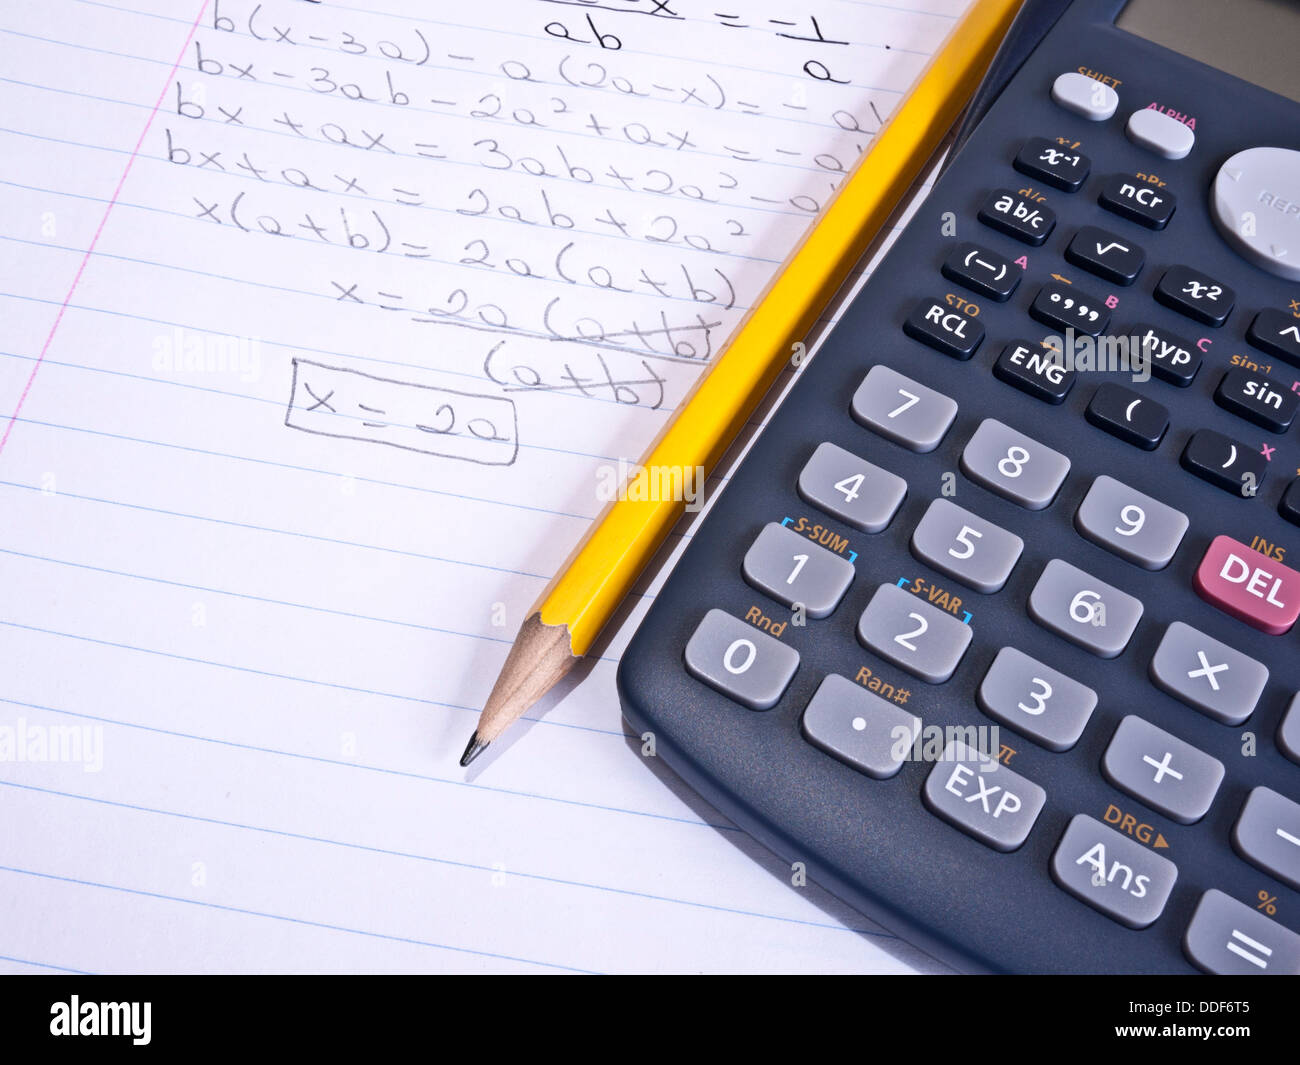 Macro Shot Of A Calculator Over A Page With A Math Problem And A